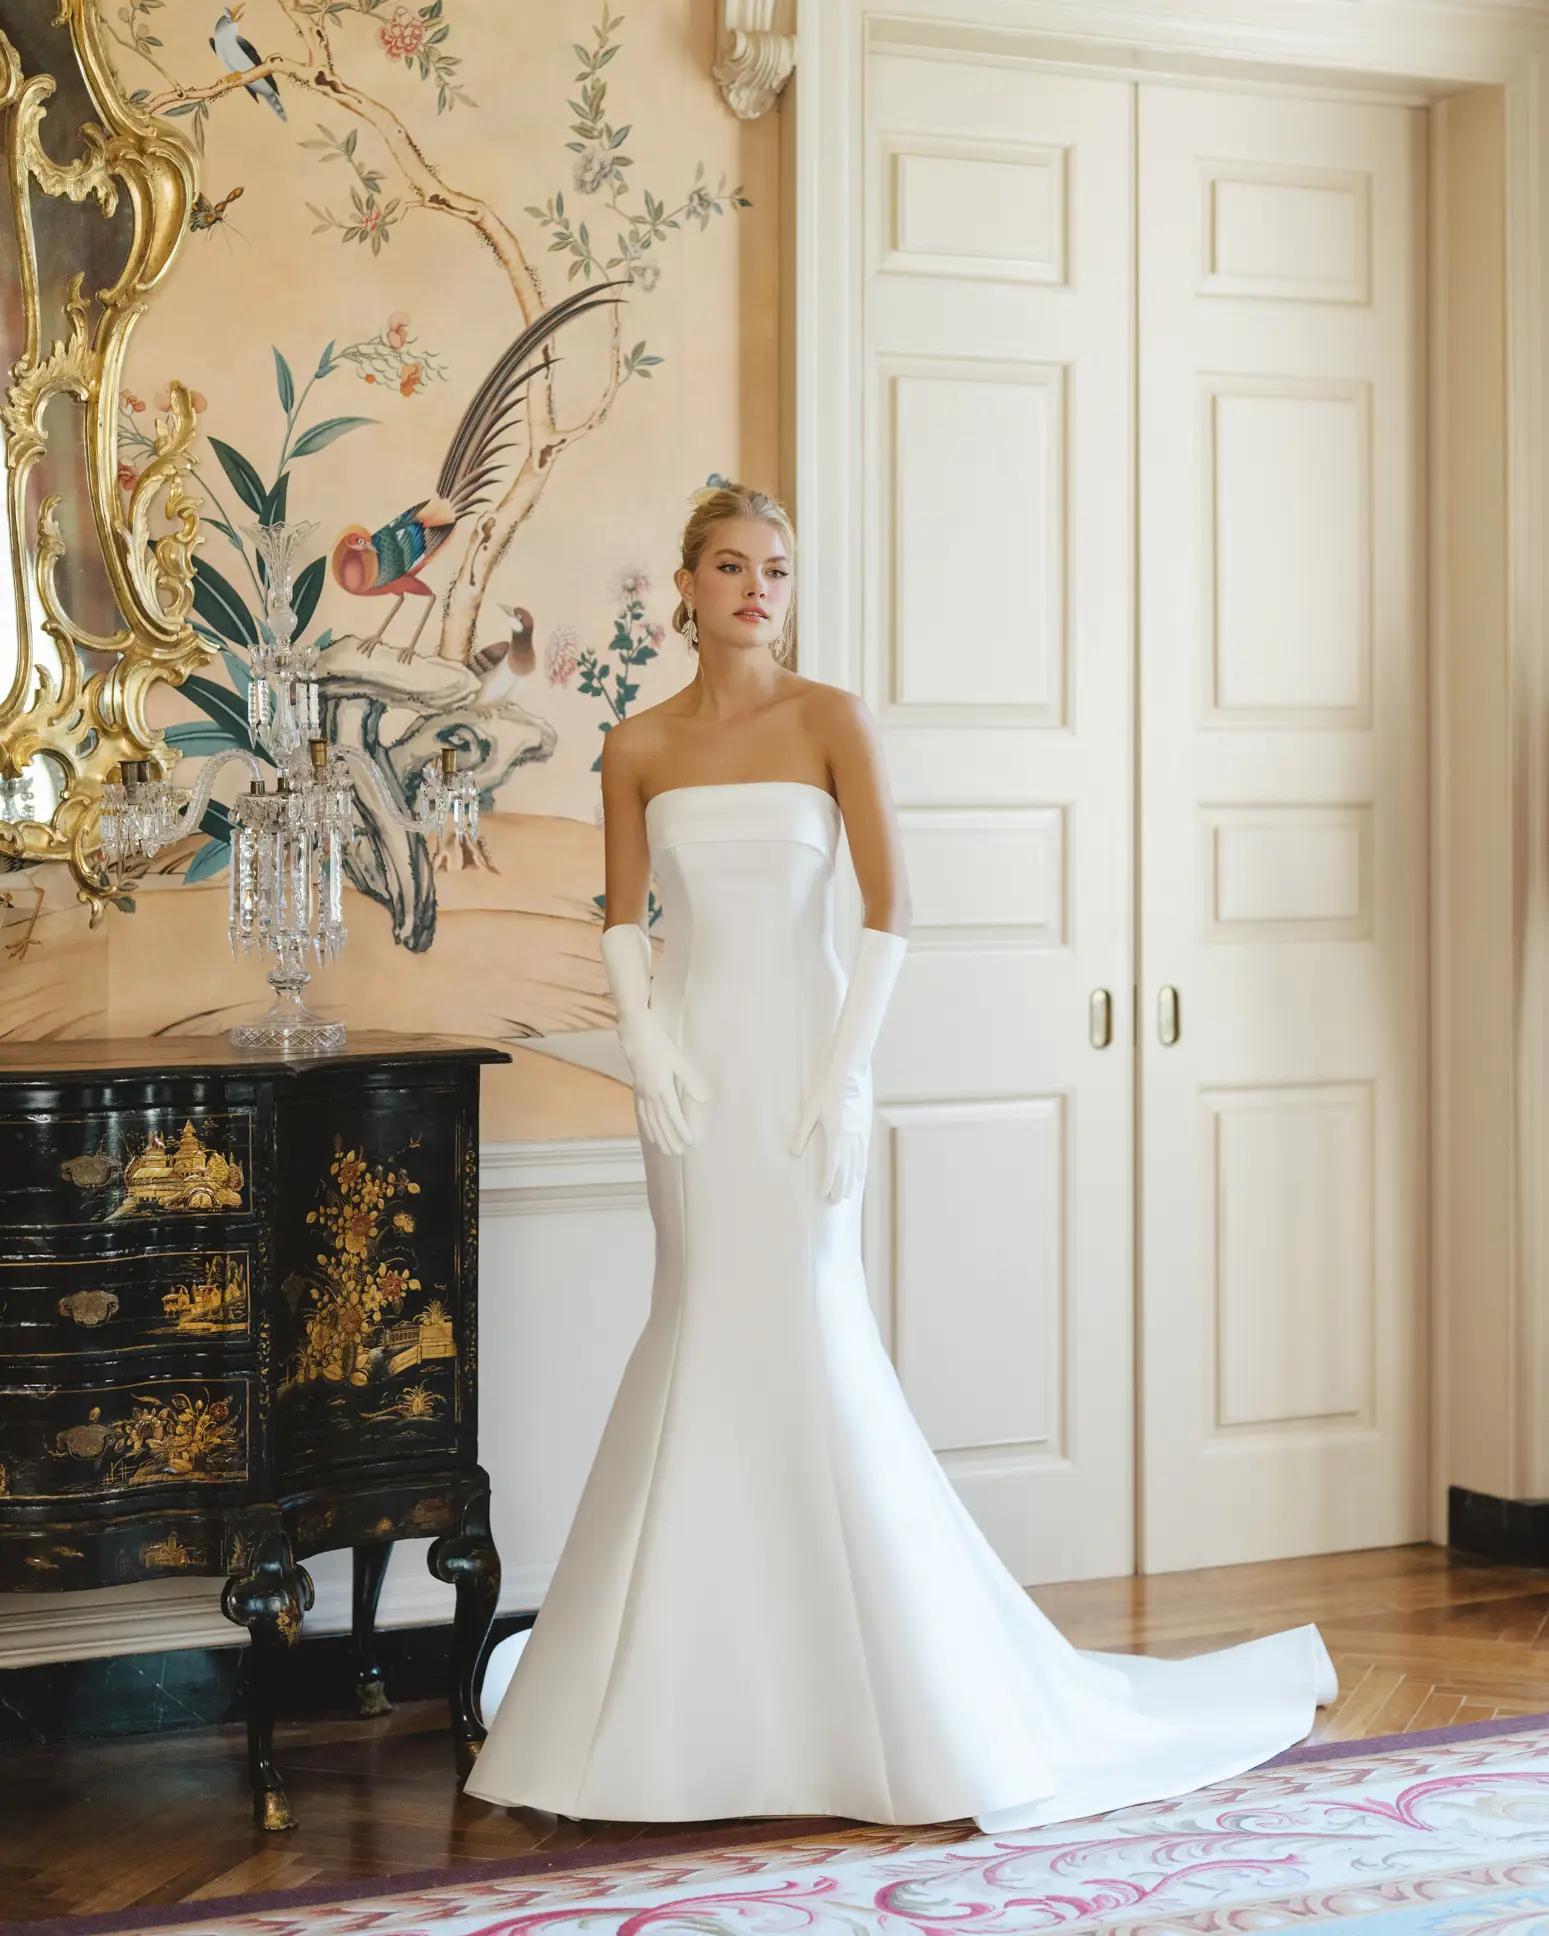 Piedmont wedding dress with straight neckline cuff detail and fitted silhouette by Anne Barge in mikado in Columbus, Ohio